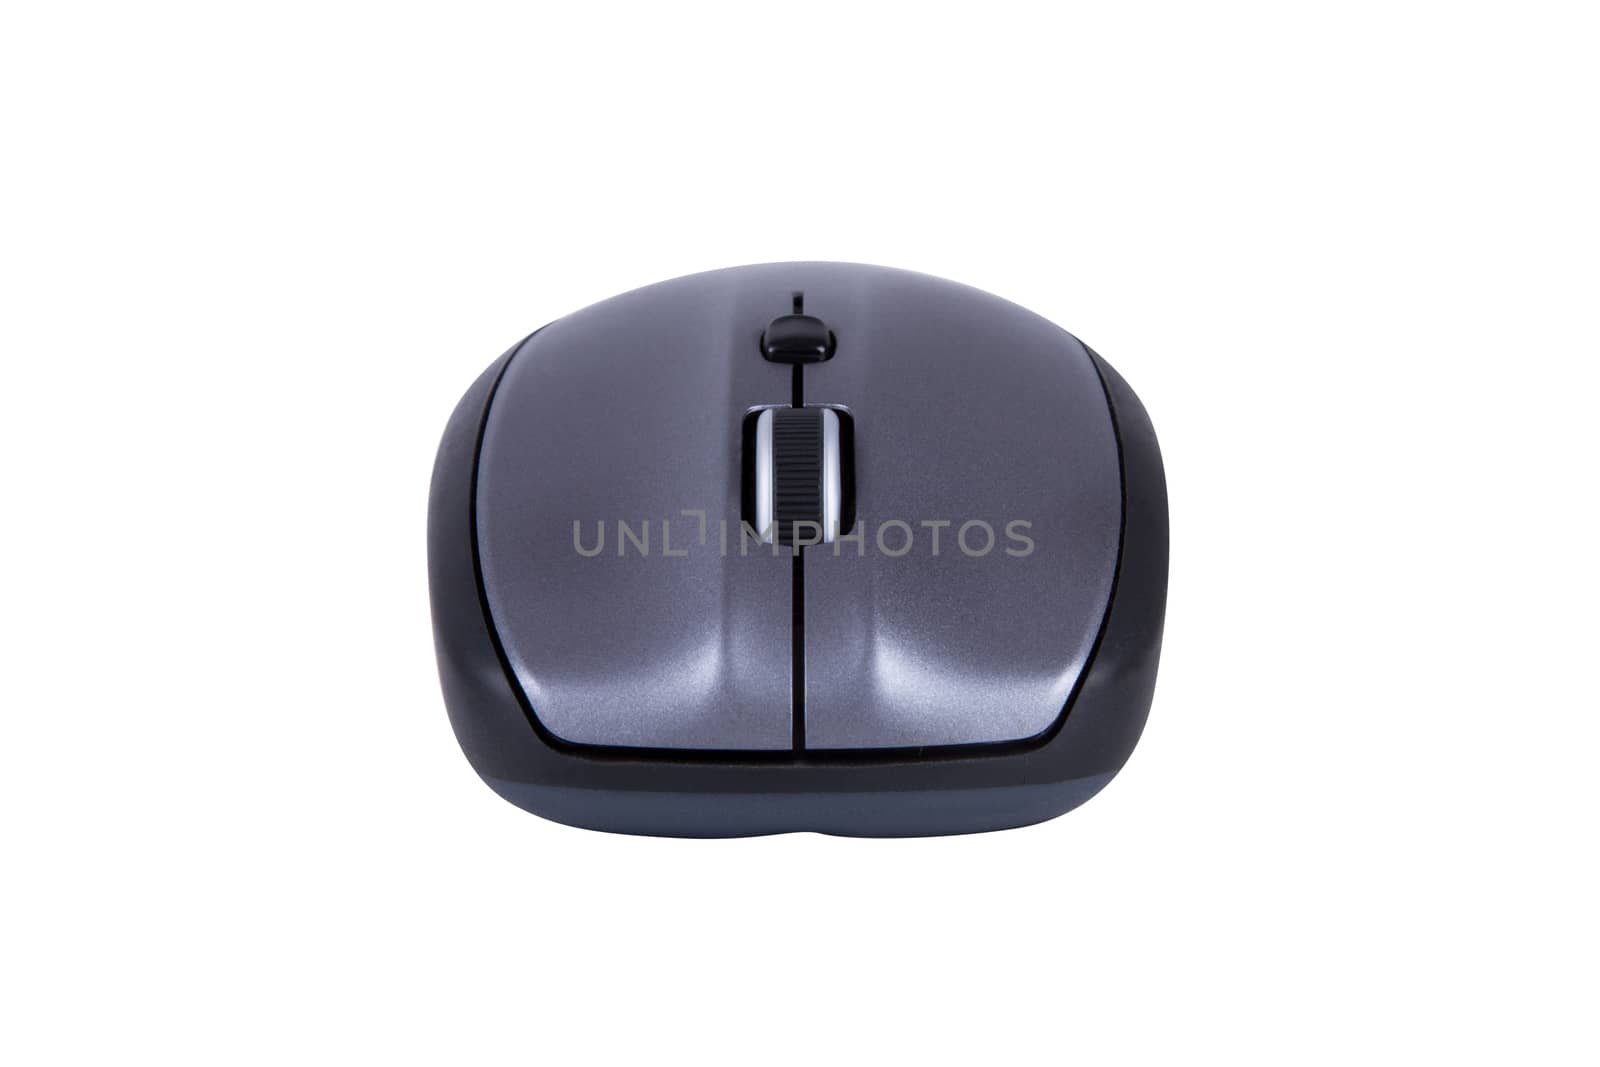 Single wireless mouse of desktop computer, front view, isolated on white background.